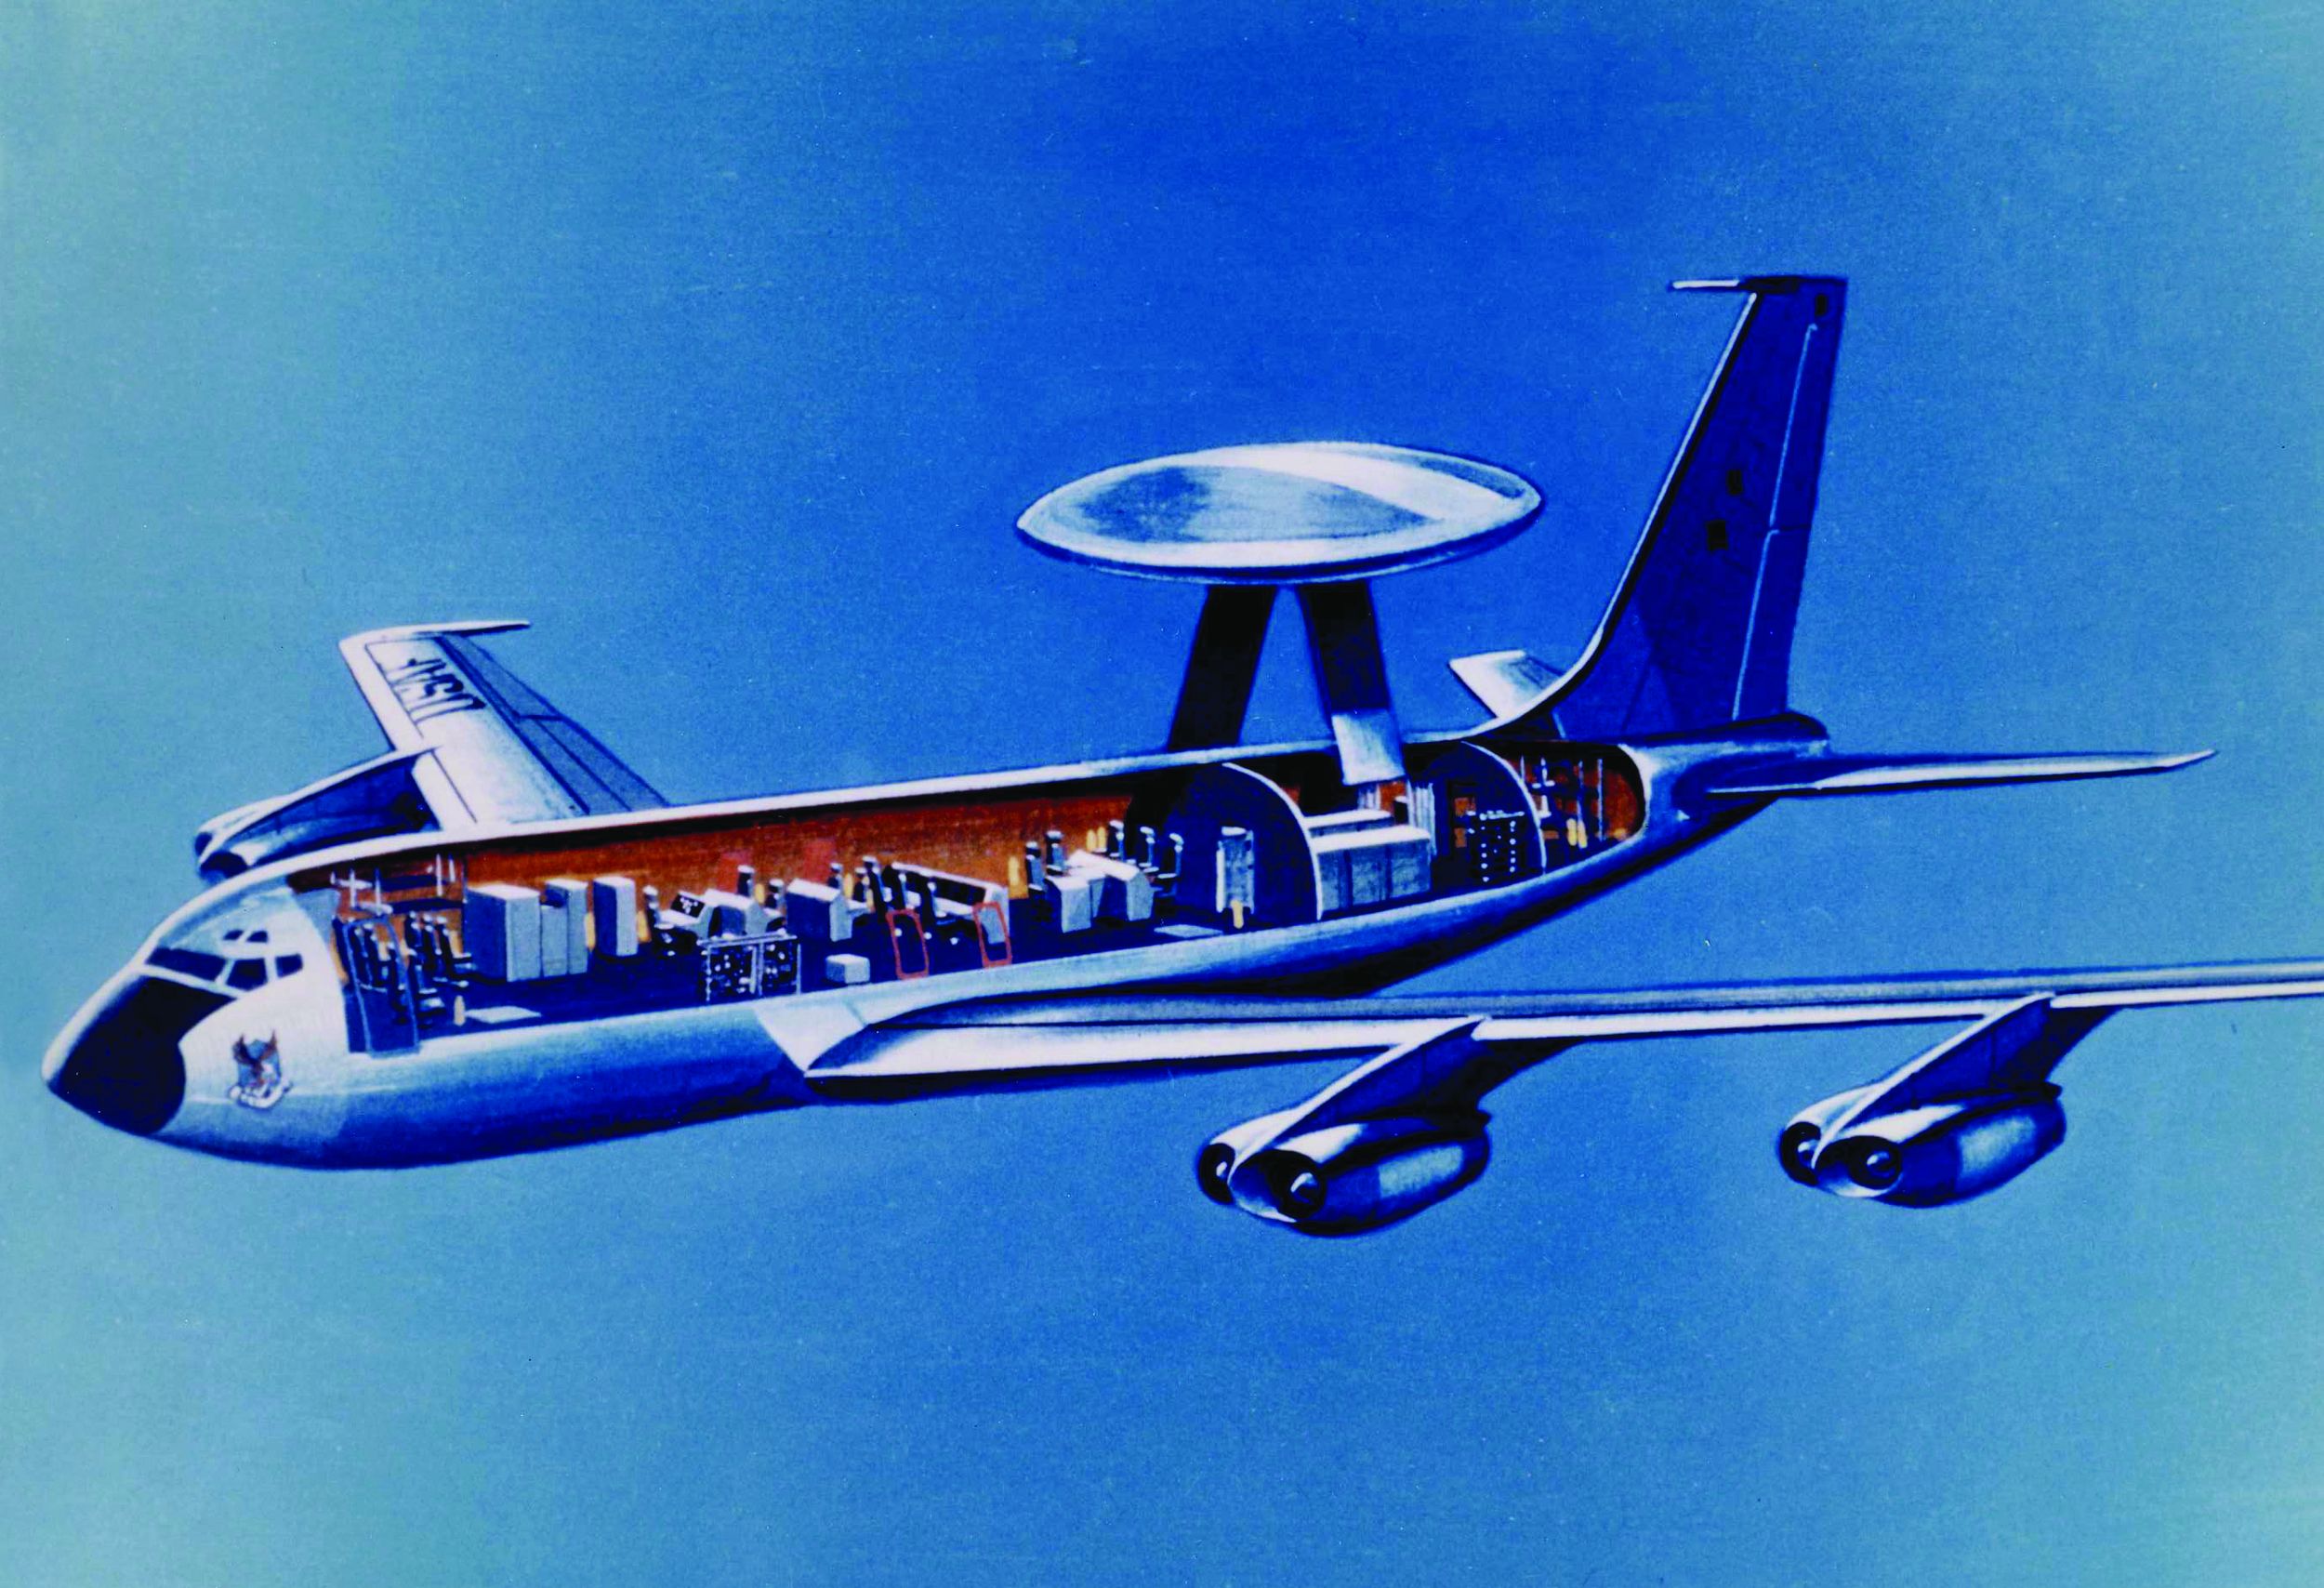 Cutaway drawing of AWACS, showing a Boeing 707-320 surmounted by the huge radome assembly that houses the surveillance radar. The interior configuration is typical of both air defense and tactical operations.